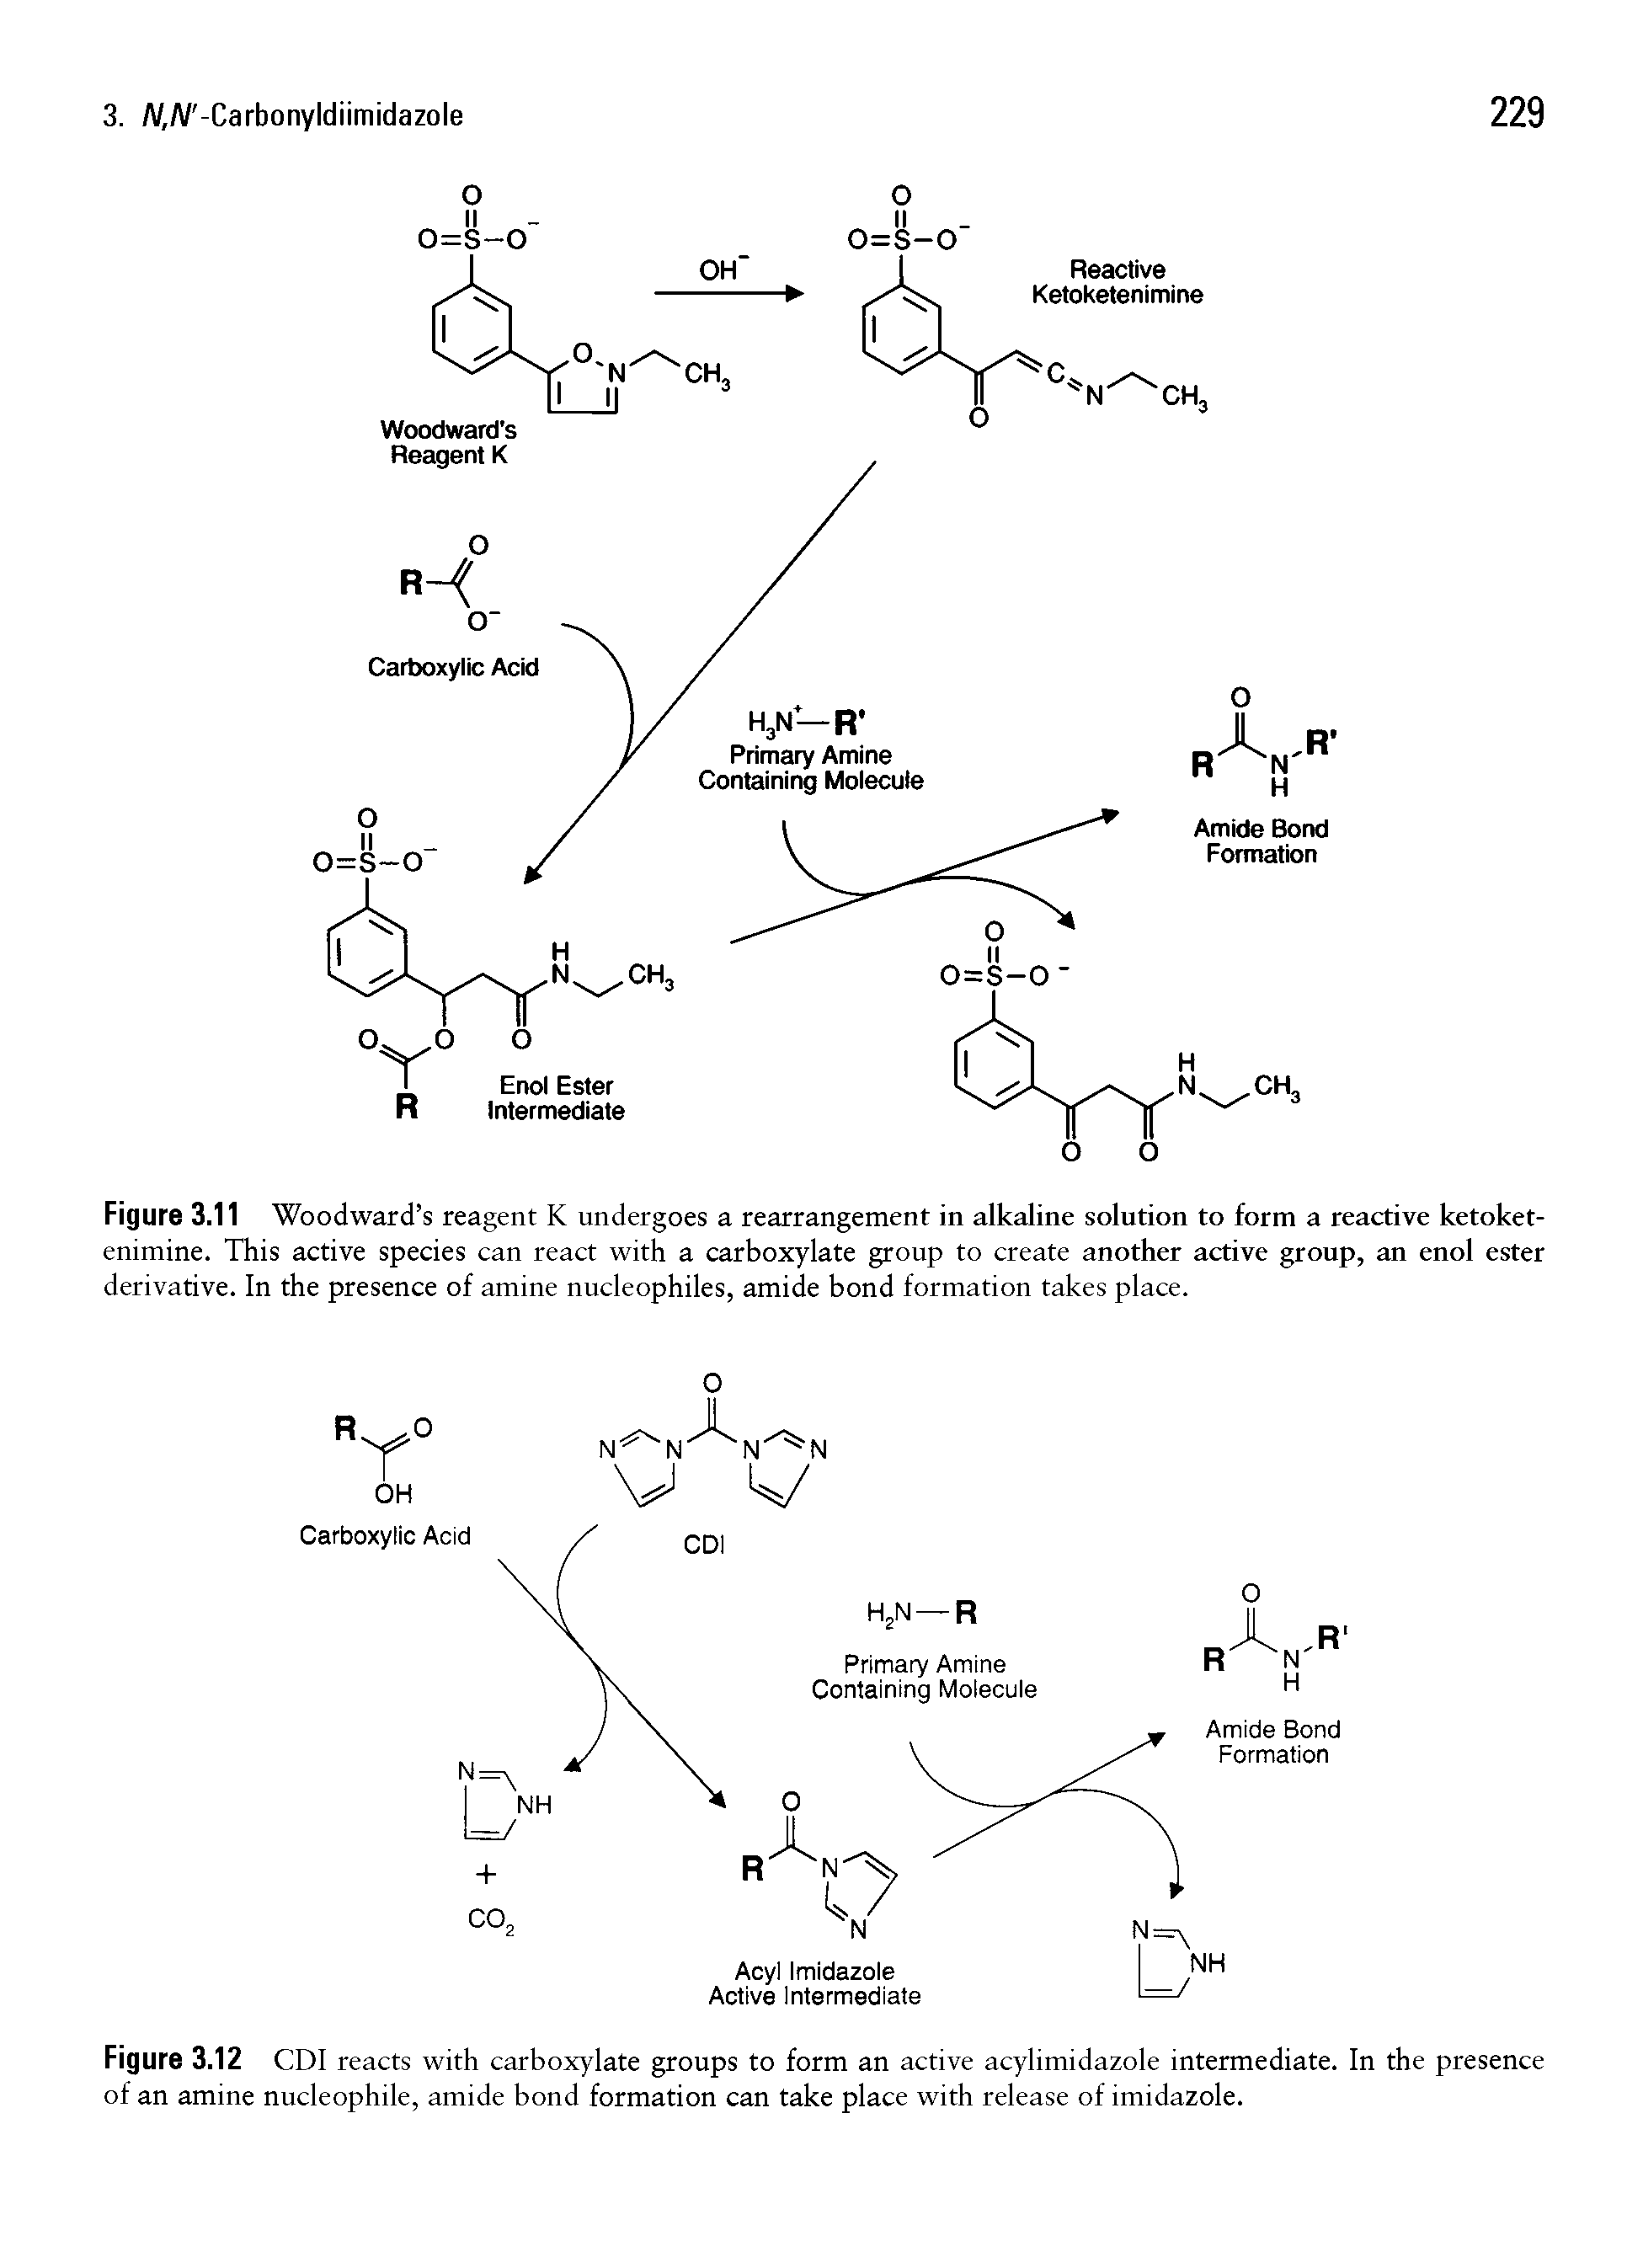 Figure 3.11 Woodward s reagent K undergoes a rearrangement in alkaline solution to form a reactive ketoket-enimine. This active species can react with a carboxylate group to create another active group, an enol ester derivative. In the presence of amine nucleophiles, amide bond formation takes place.